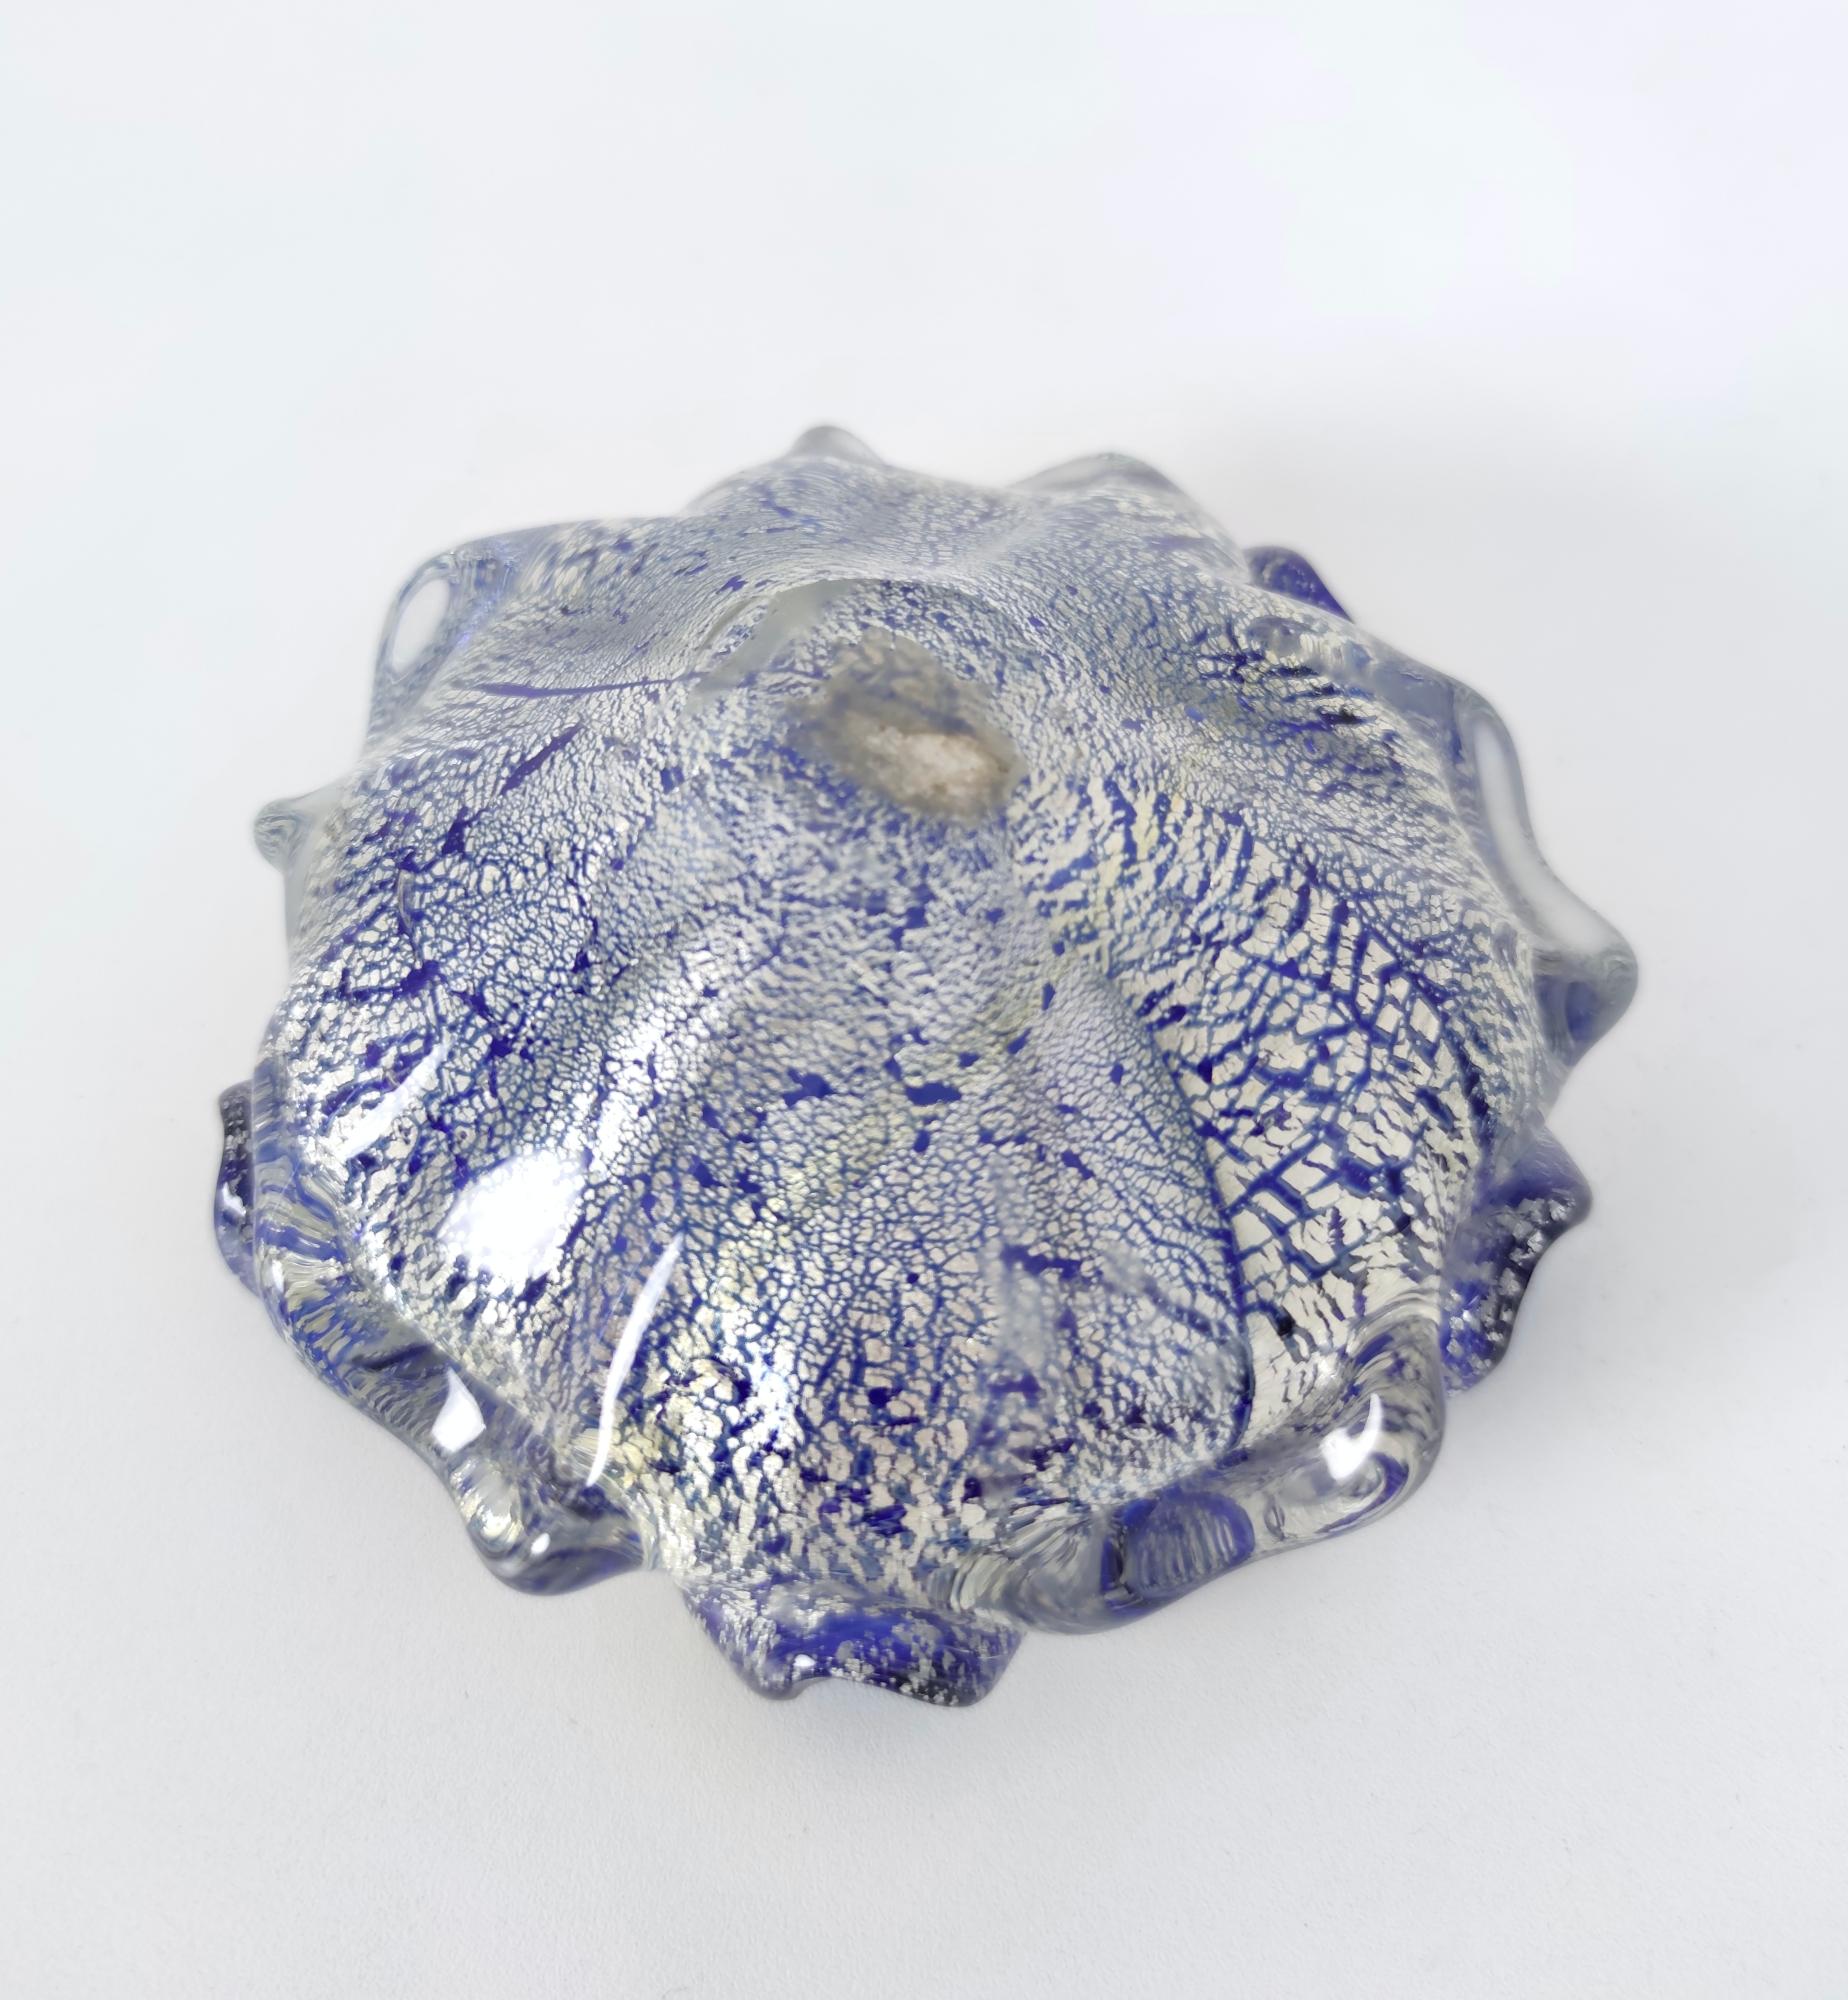 Italian Vintage Blue Murano Glass Ashtray-Catchall Ascribable to Toso with Silver Flakes